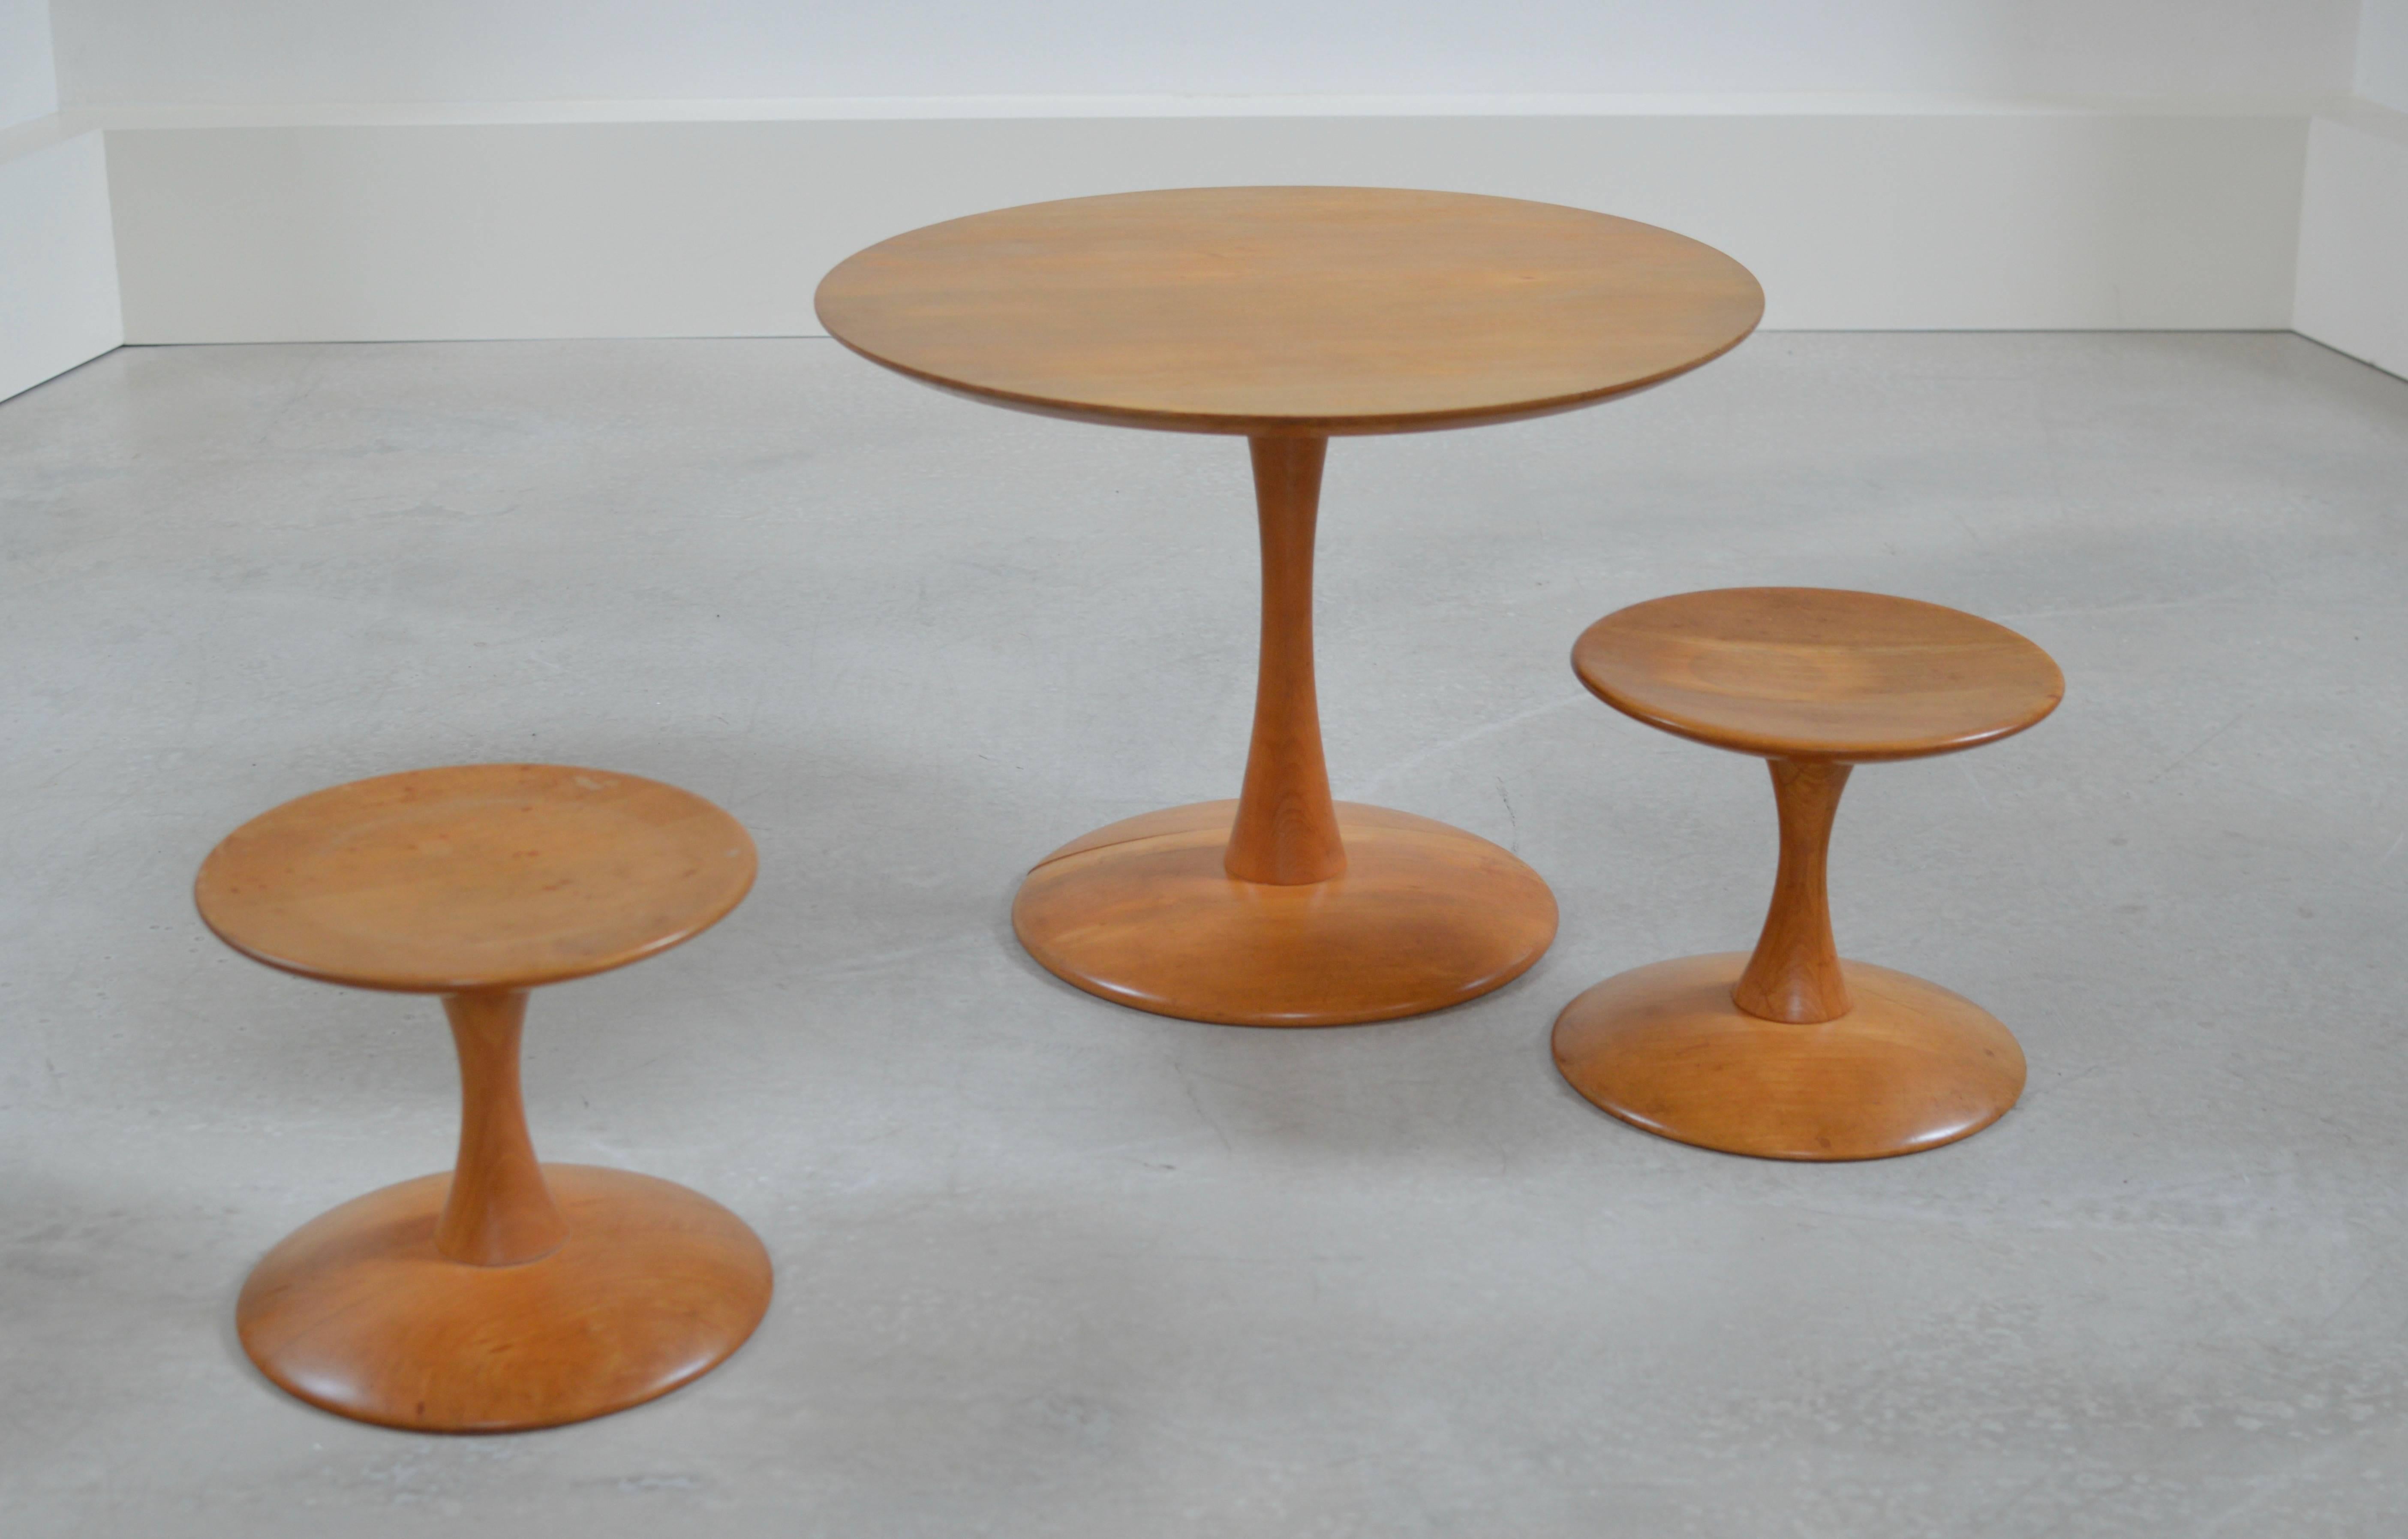 Early beech 'toadstool' table by Nanna Ditzel, circa 1965 manufactured by Danish producer Kolds Savvaerk. 
Matching stools (shown next to table) also available. To be found in our inventory.